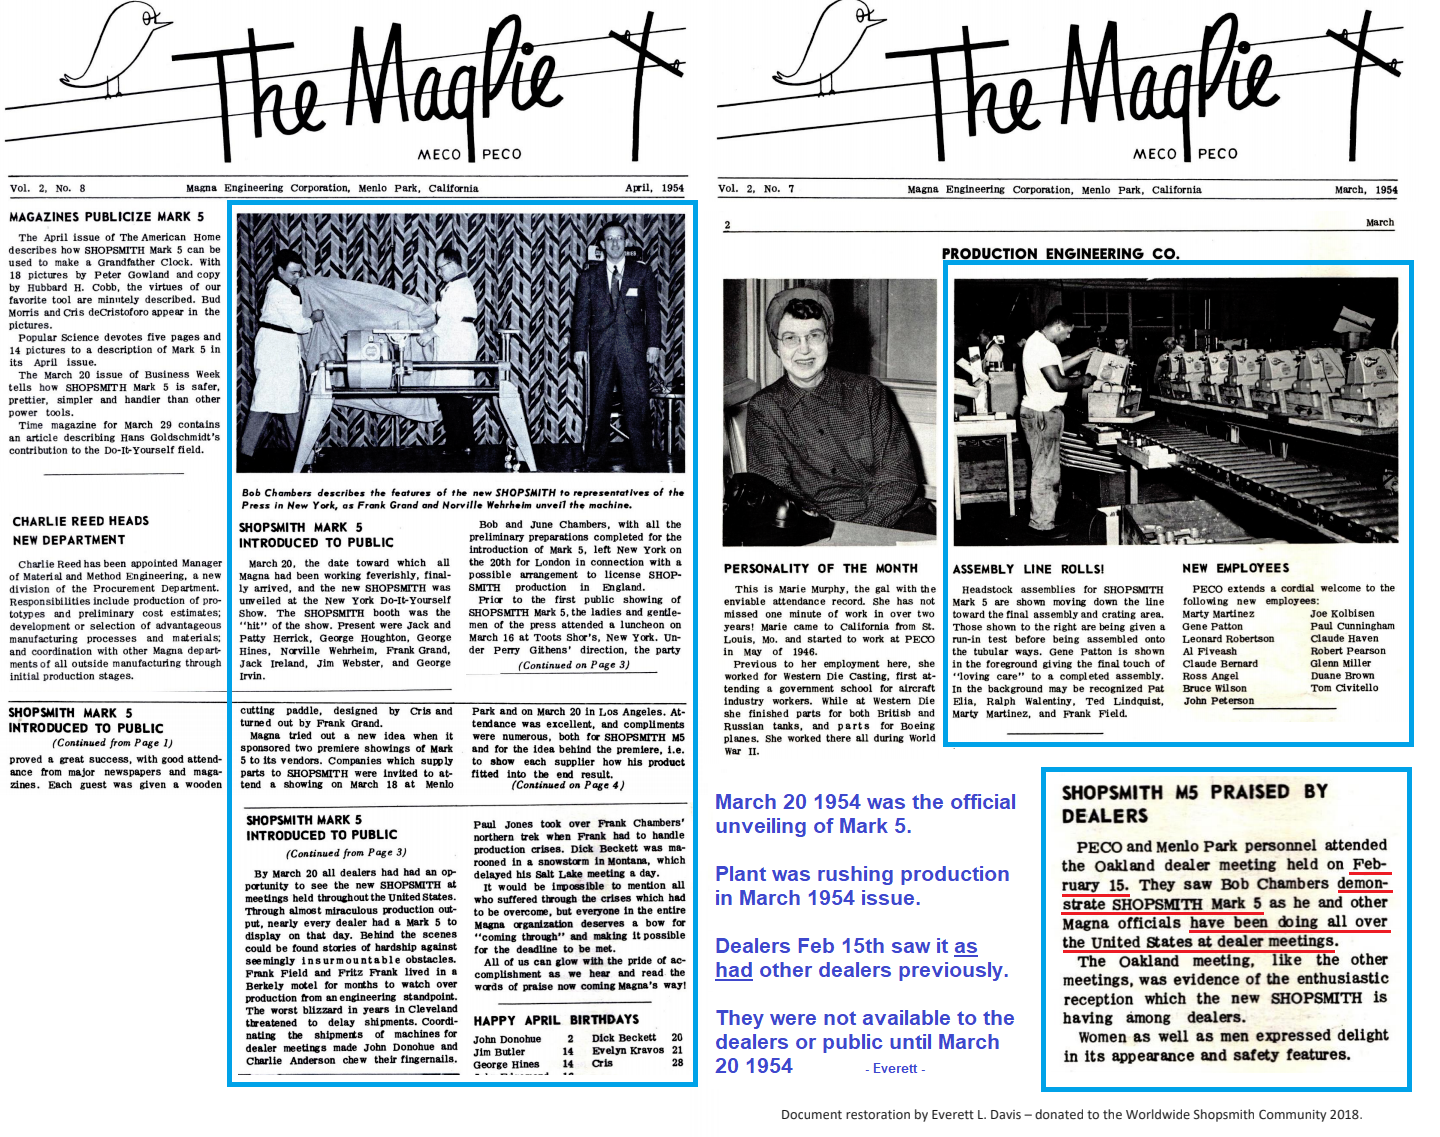 MagPie Snippets for Mark 5 first production dates and March 20 1954 Release Date.png